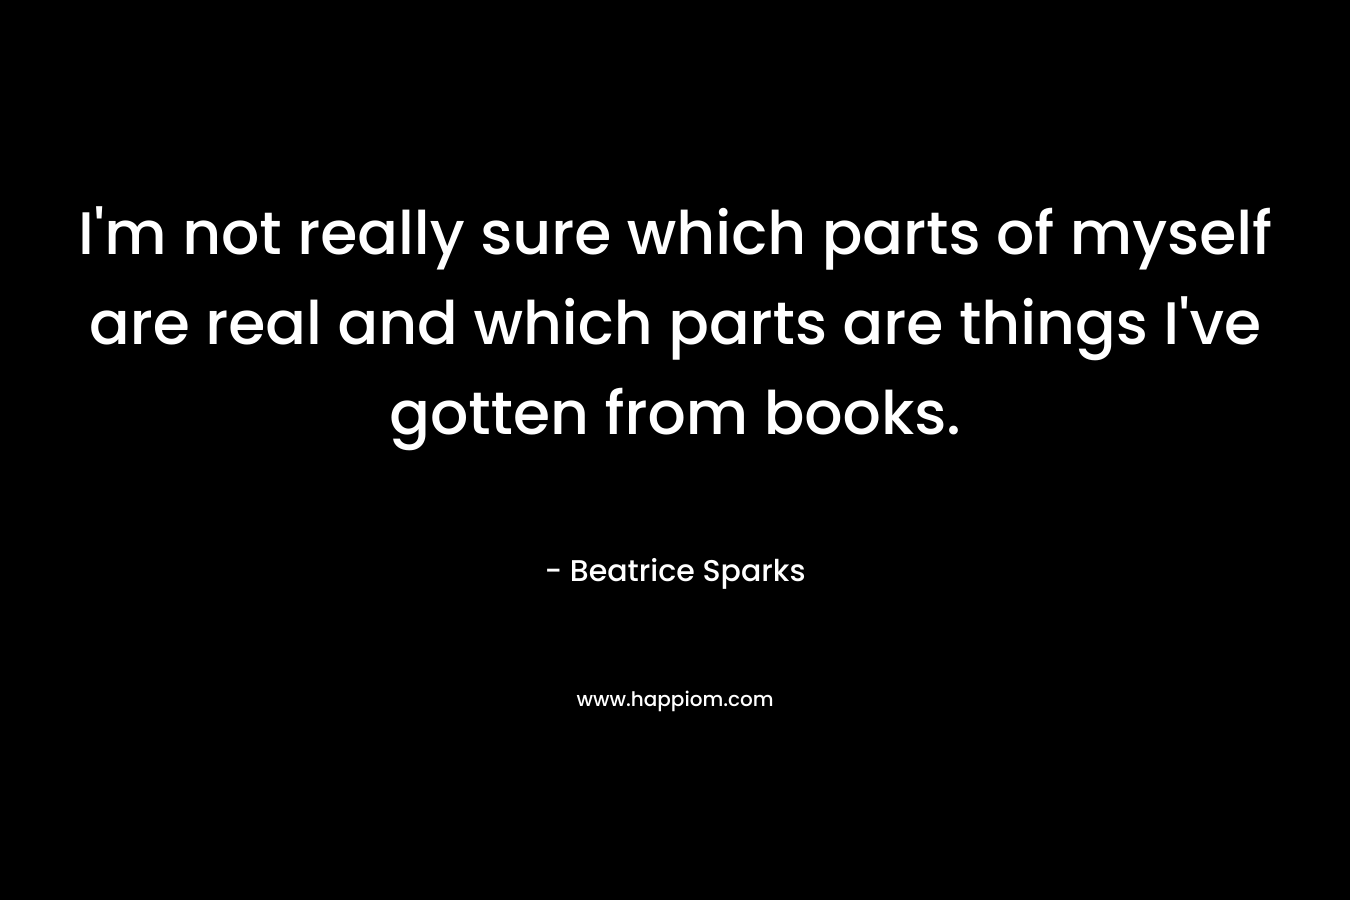 I’m not really sure which parts of myself are real and which parts are things I’ve gotten from books. – Beatrice Sparks